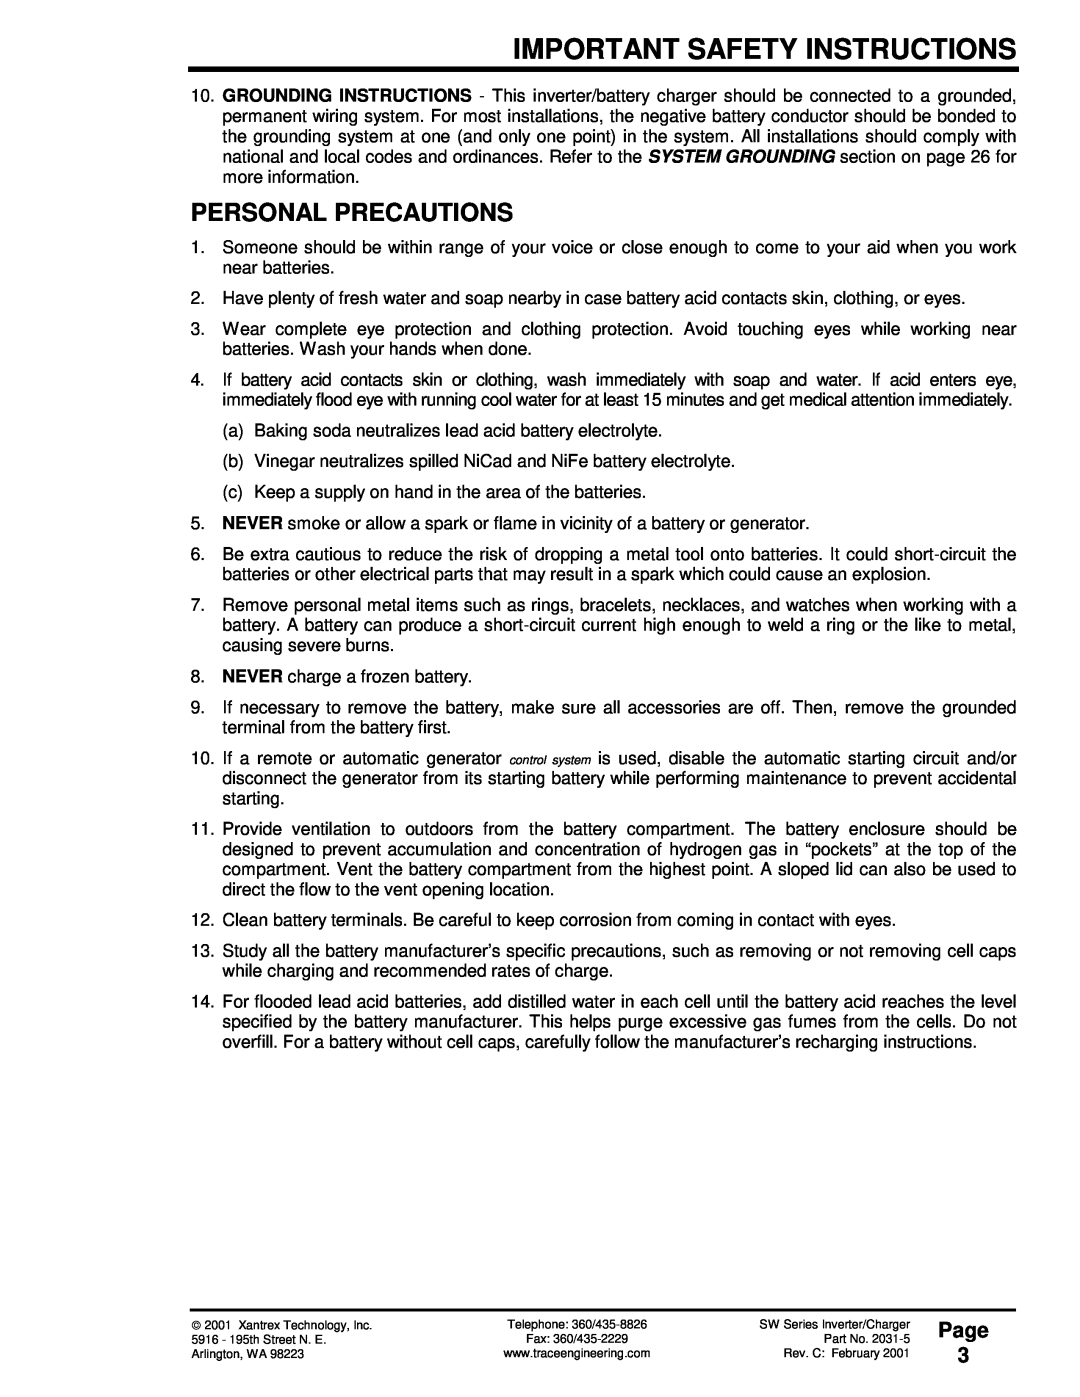 Xantrex Technology SW Series owner manual Personal Precautions, Page 3, Important Safety Instructions 